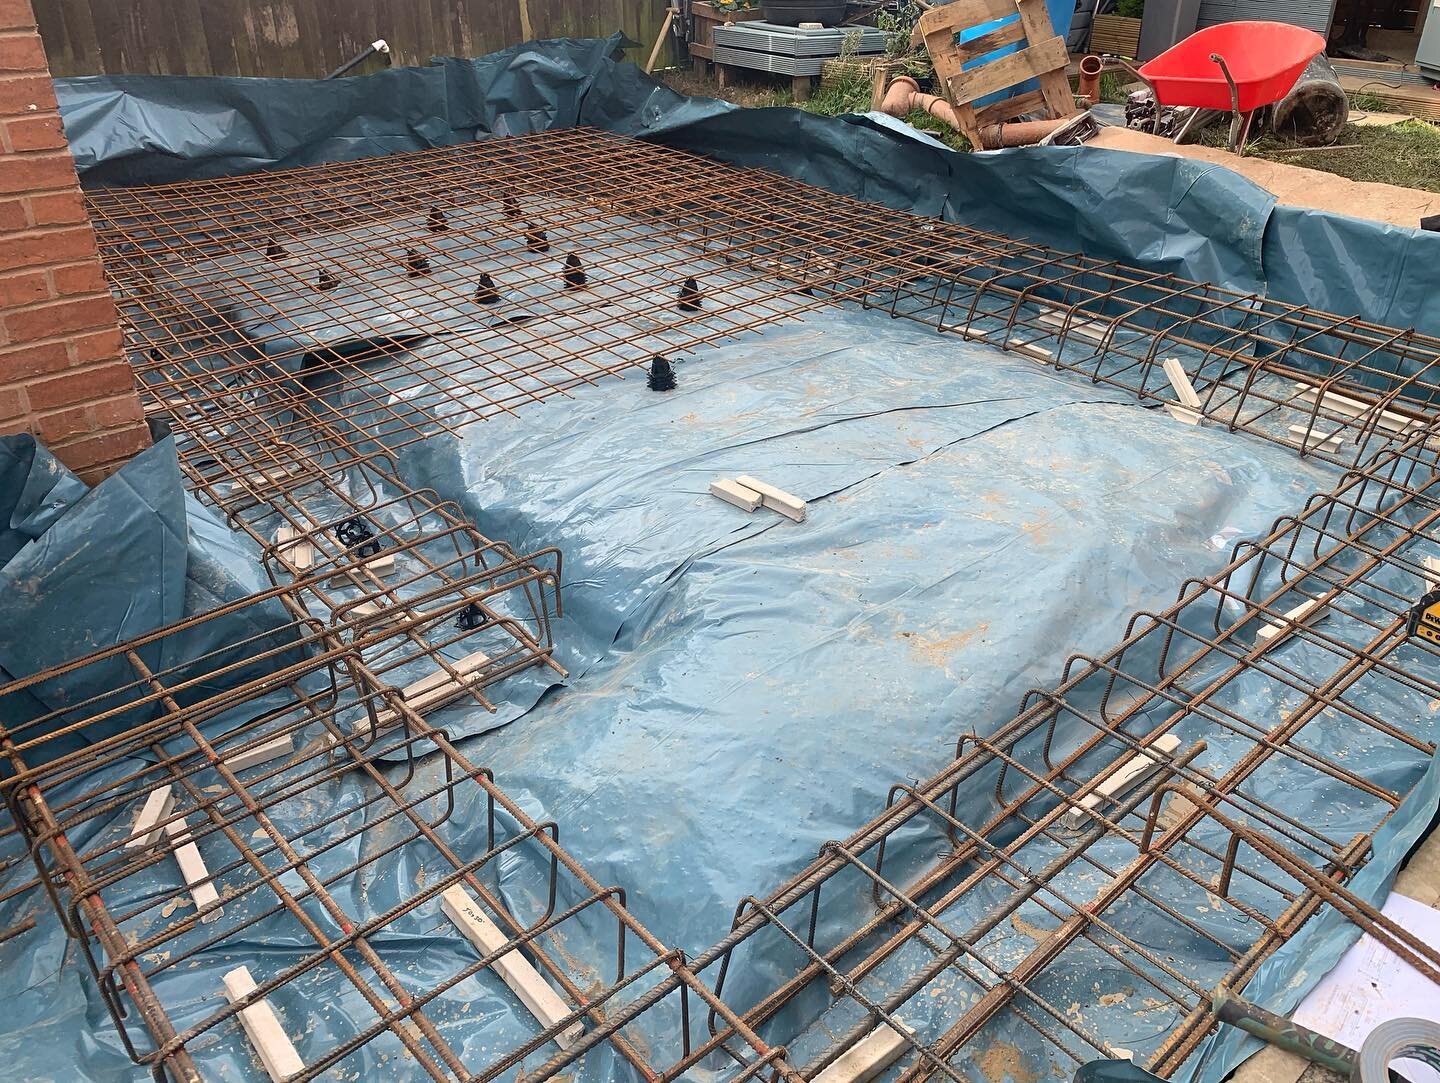 A raft foundation for a house extension well underway

#structuralengineering #foundations #raftfoundation #reinforcement #rebar #houseextension